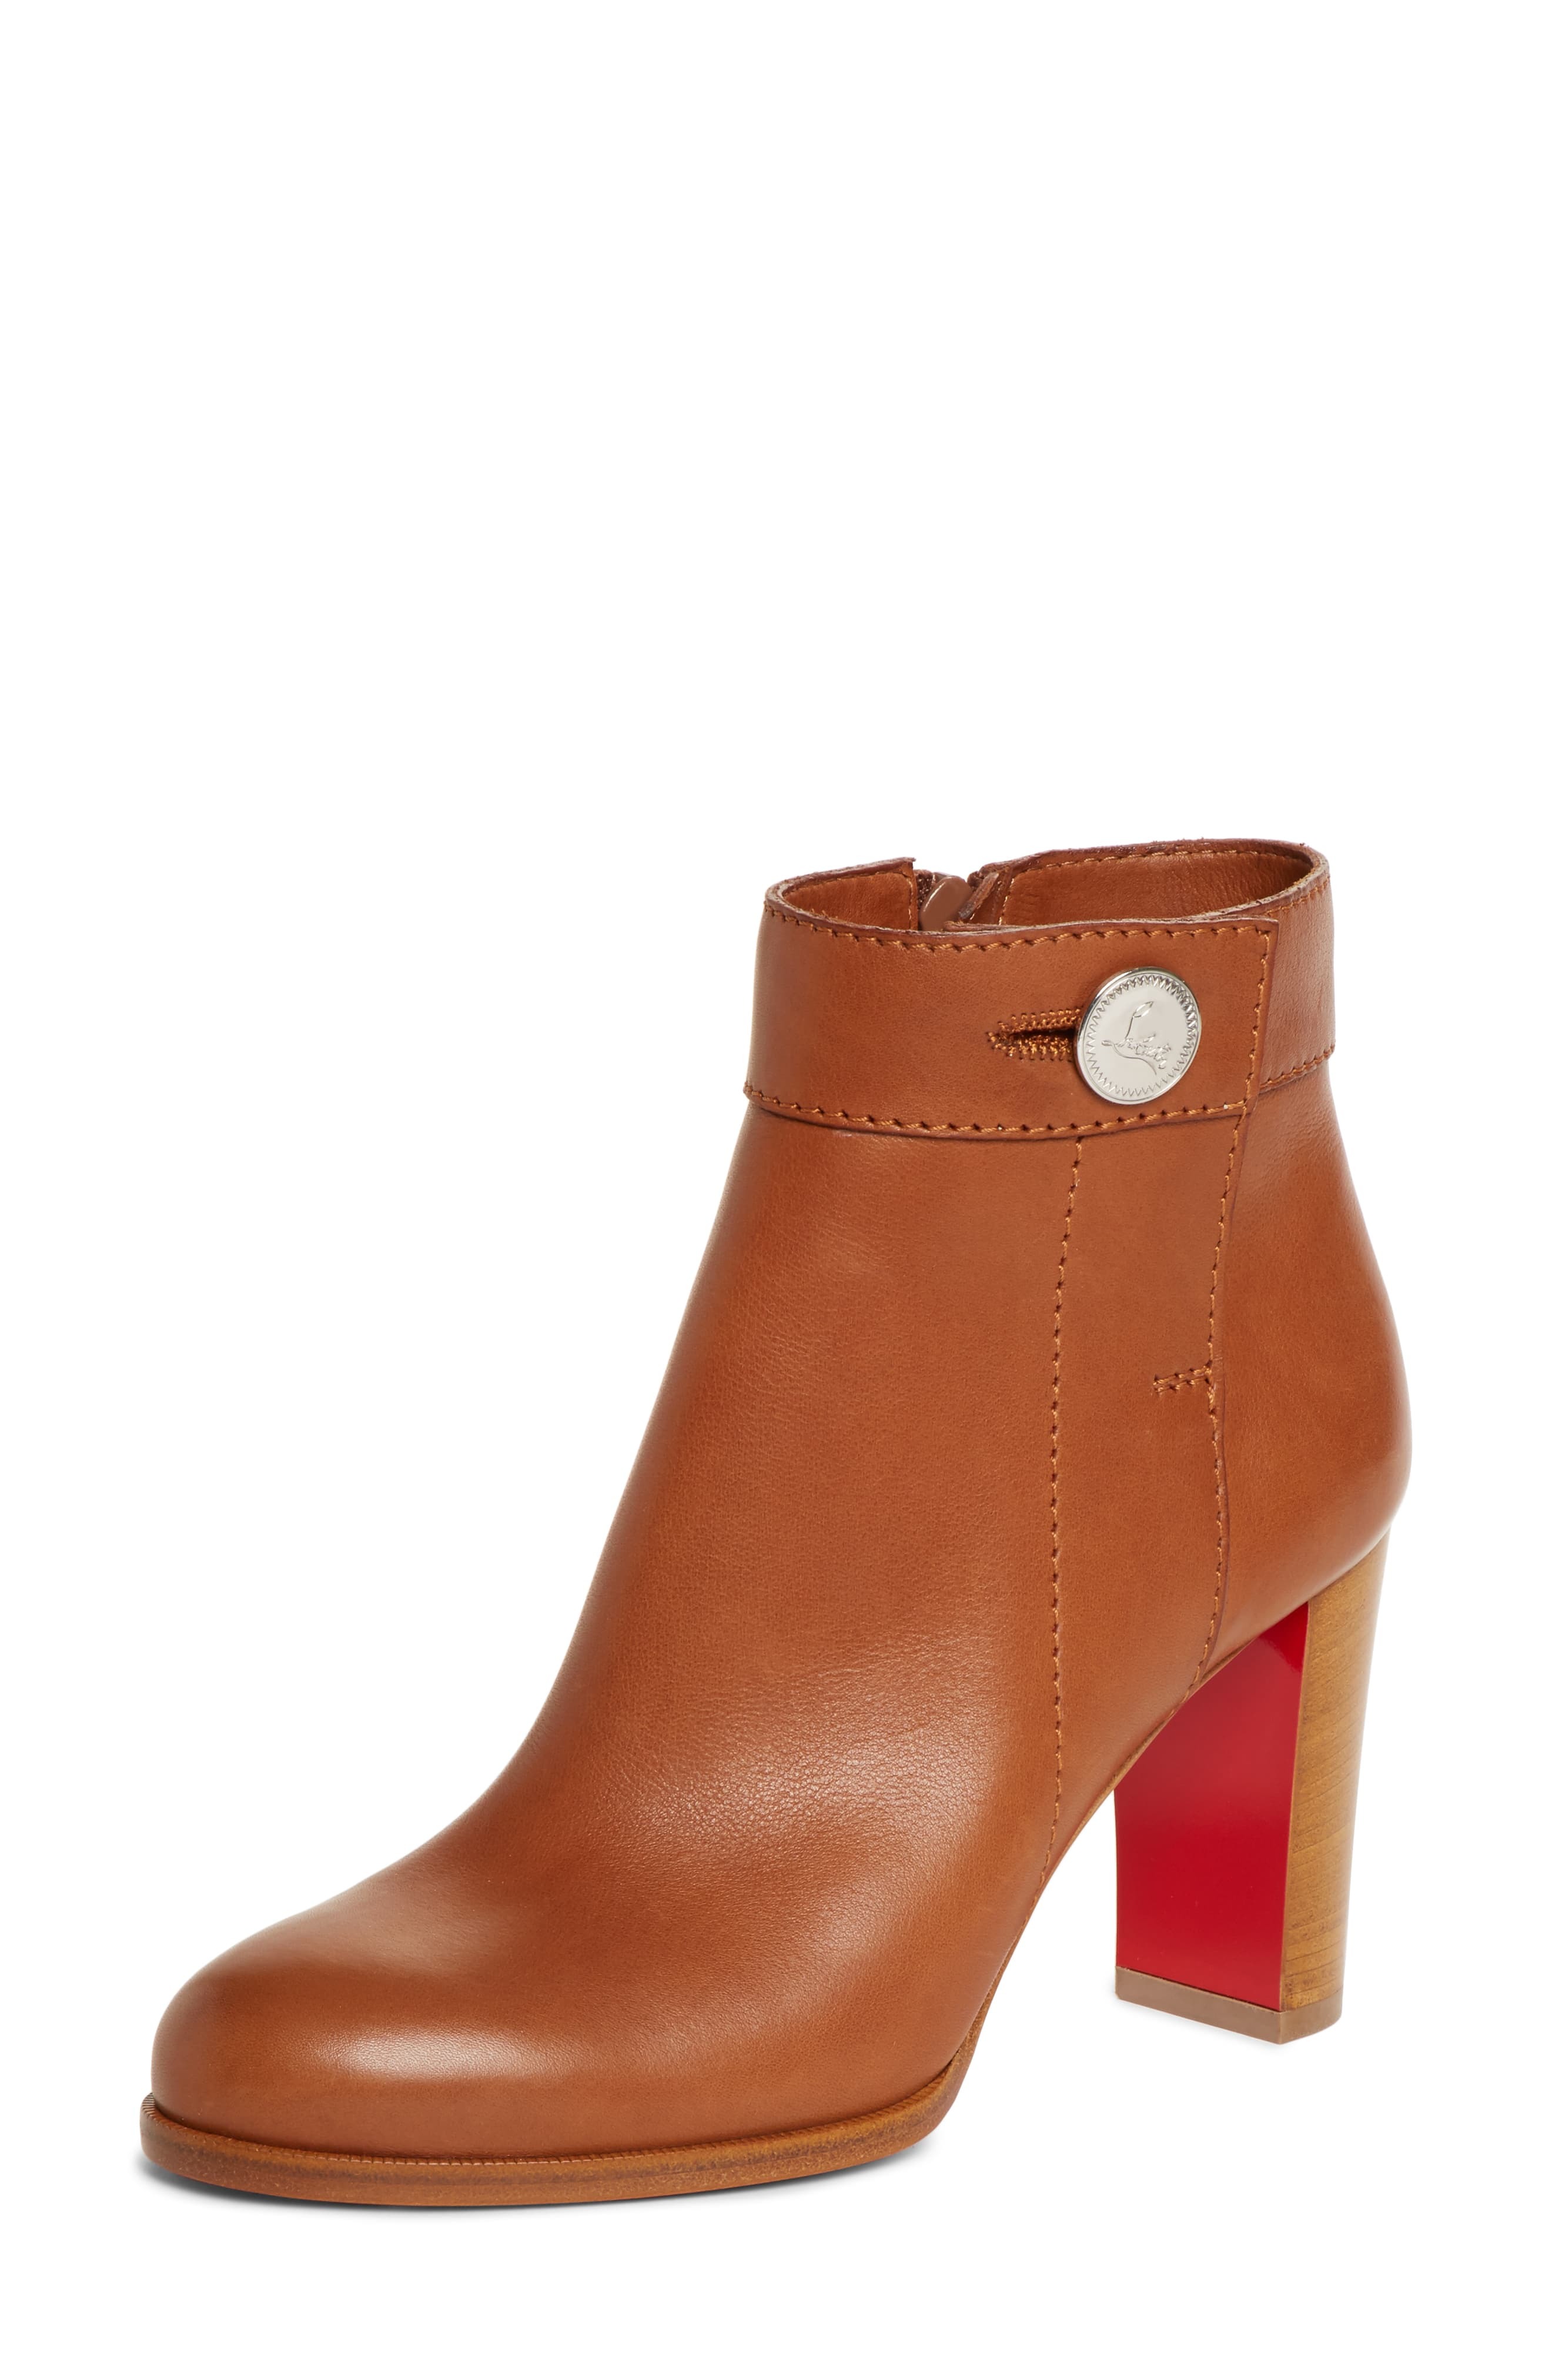 louboutin button boots